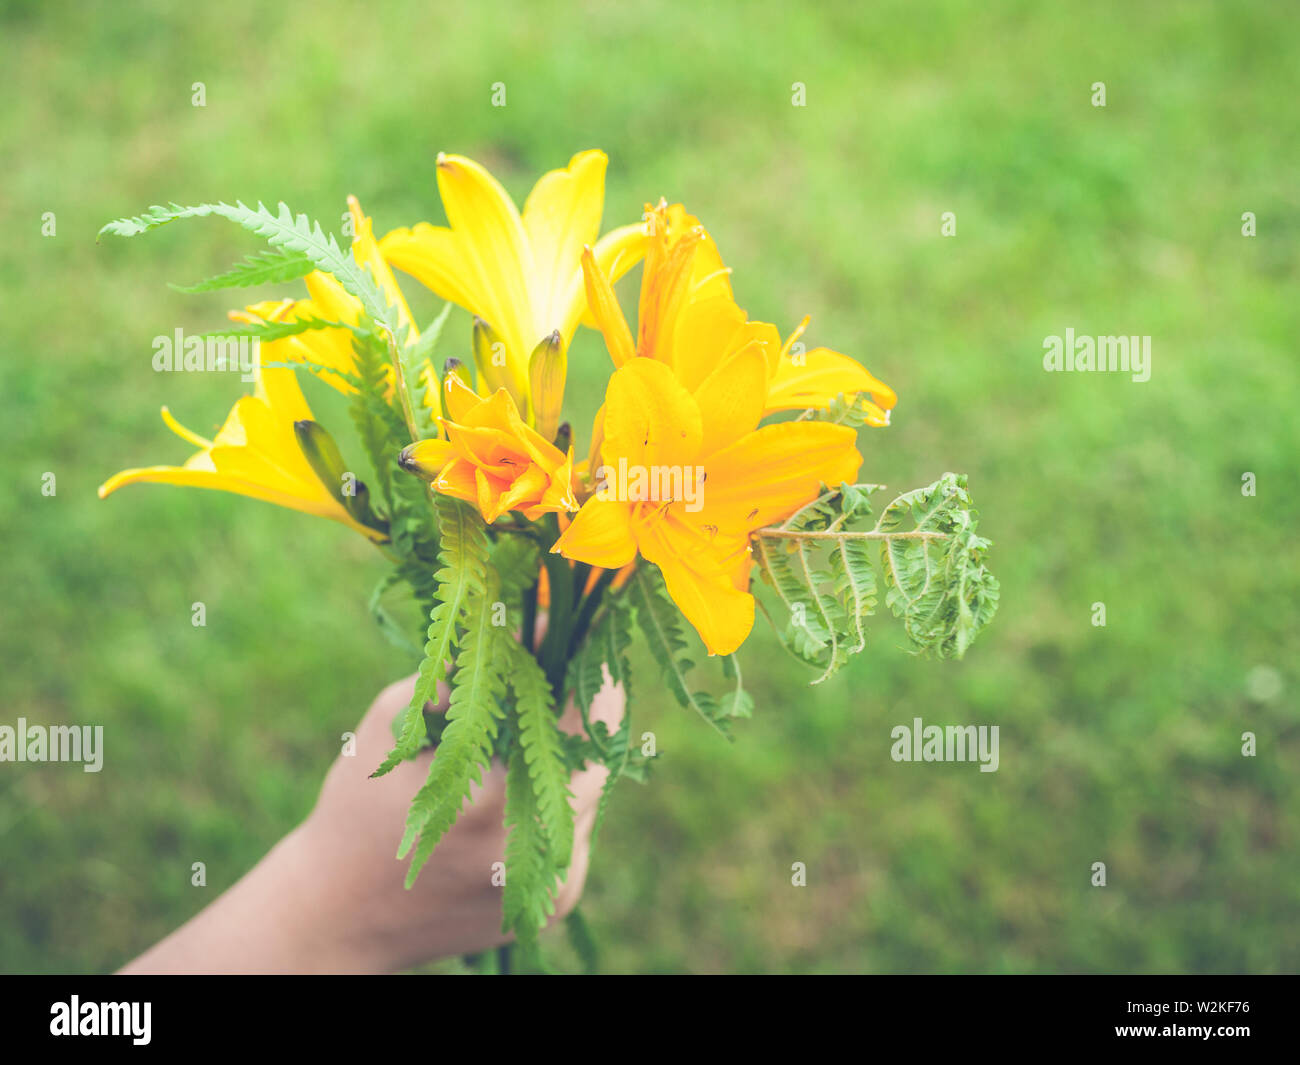 Children's hand holds a bouquet of yellow lilies and fern leaves on the background of green grass Stock Photo